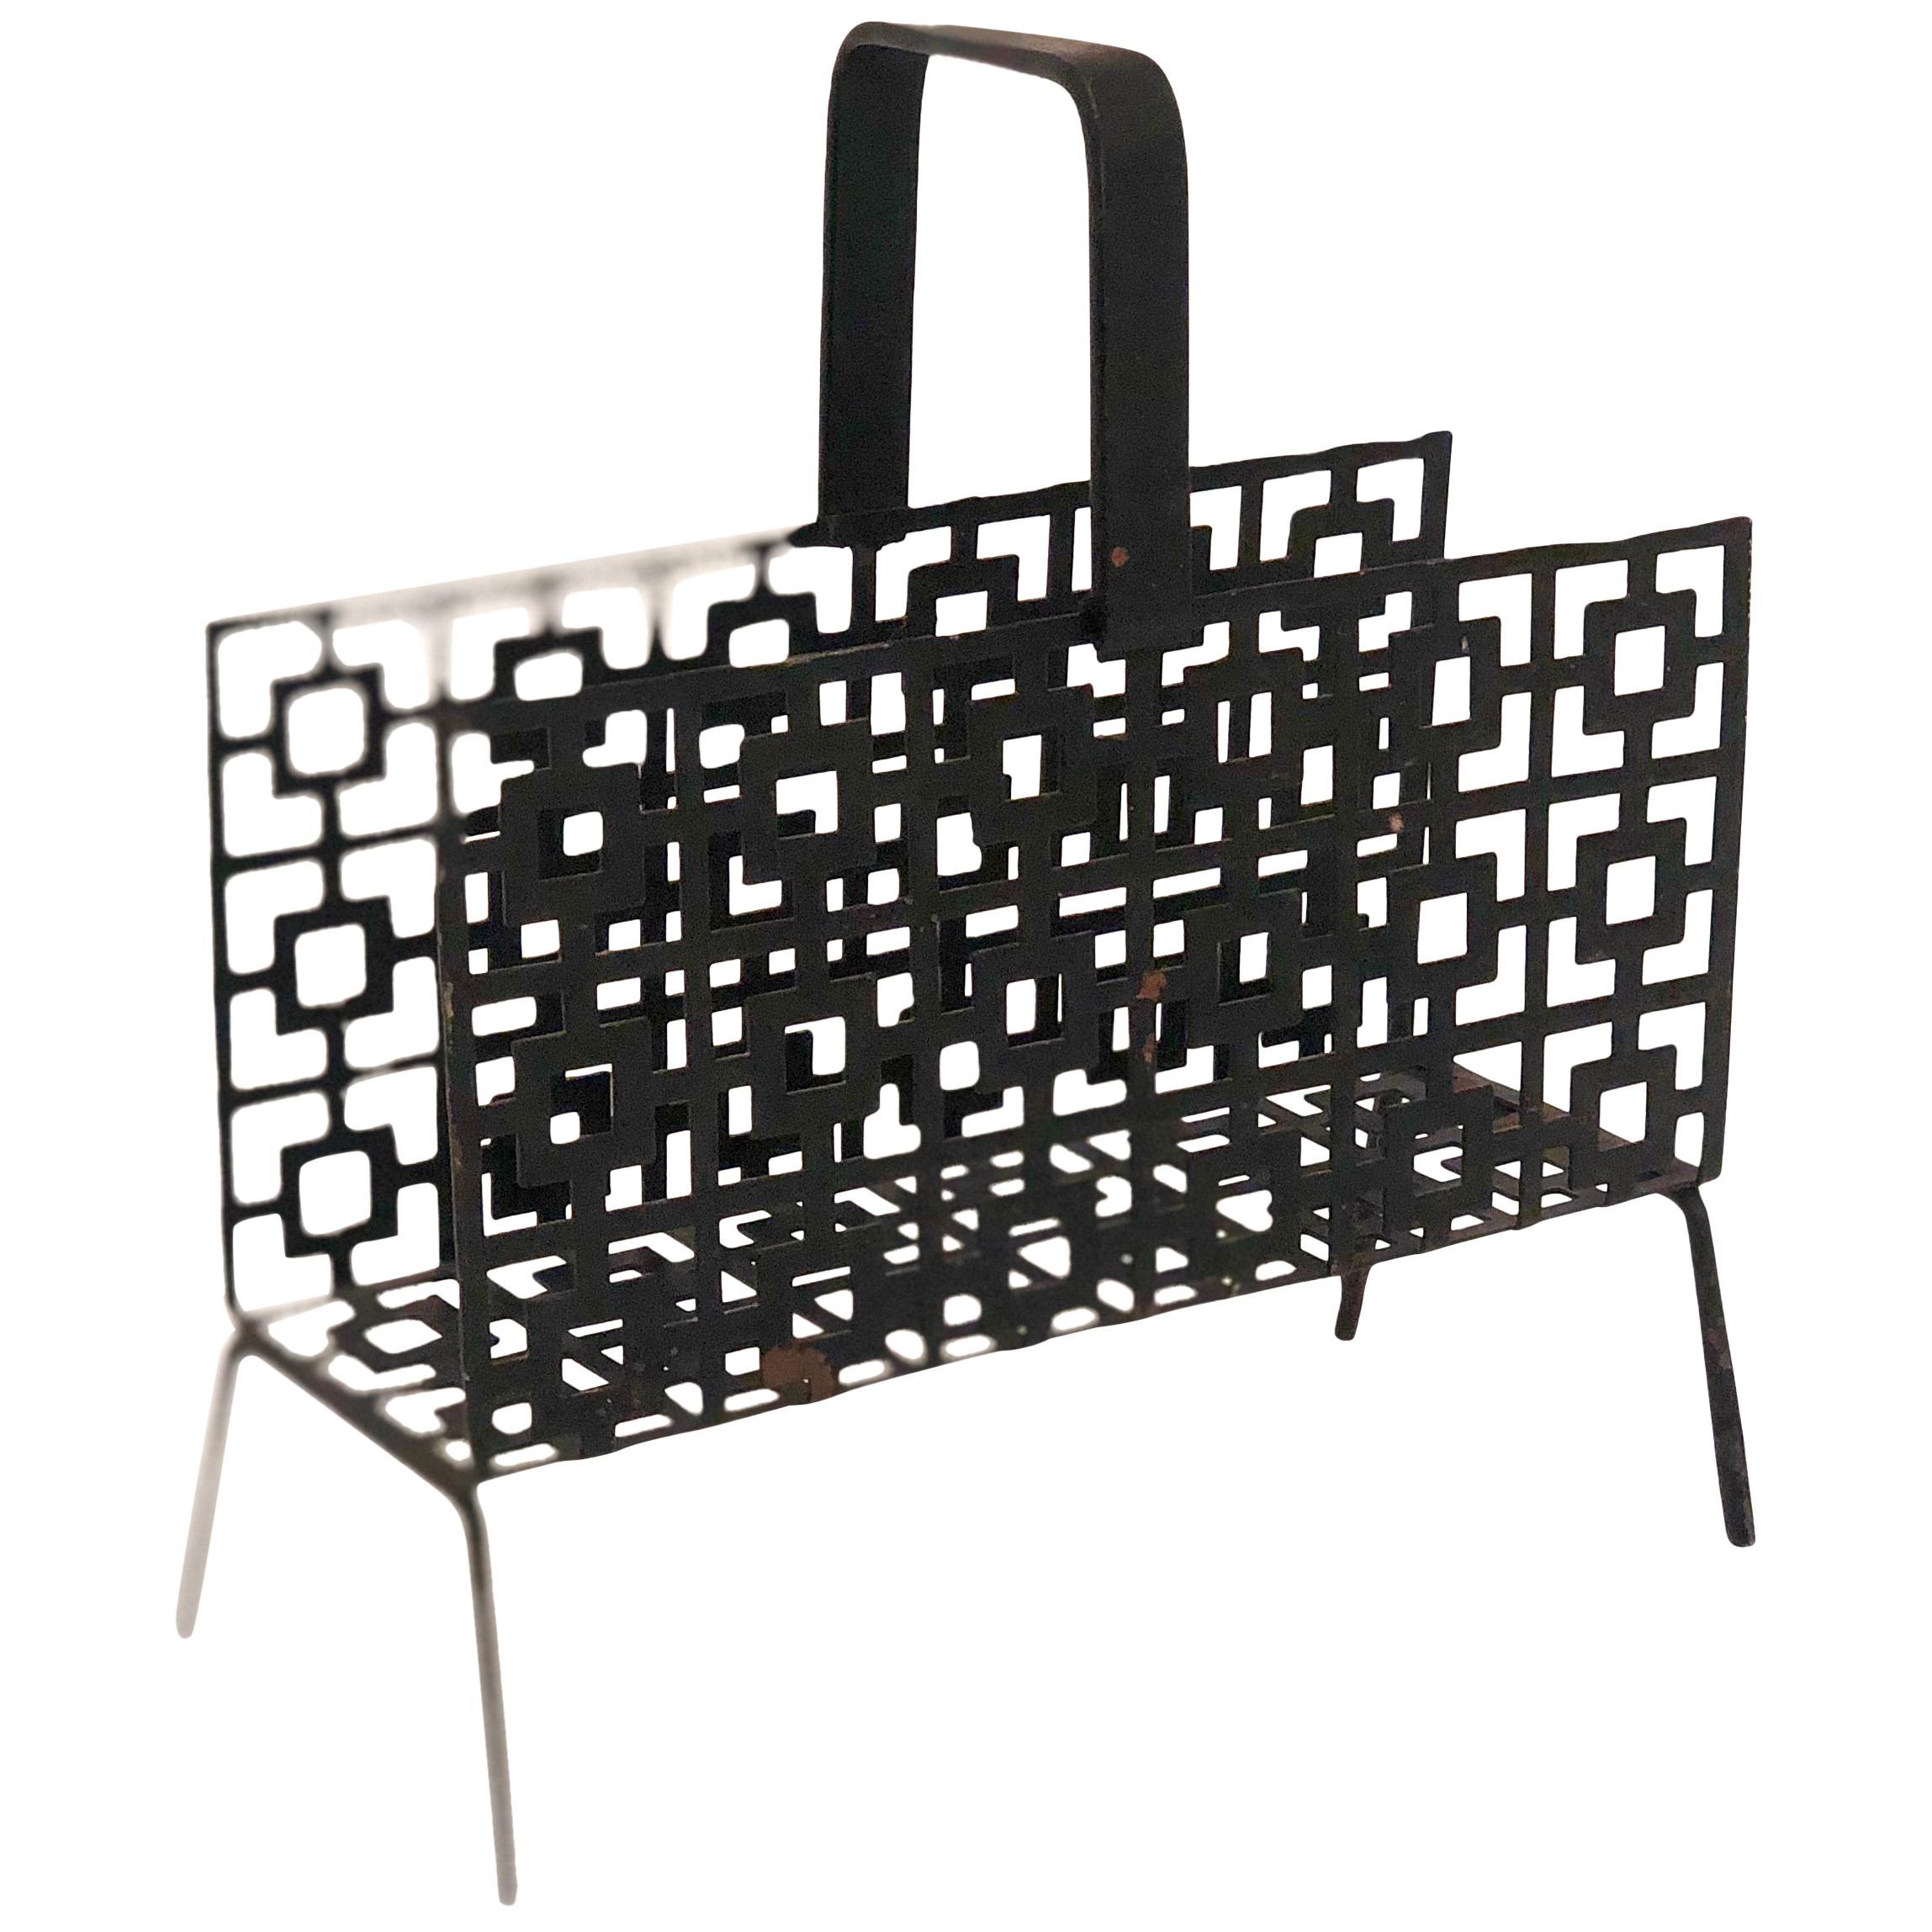 Midcentury Perforated Metal Letter Holder